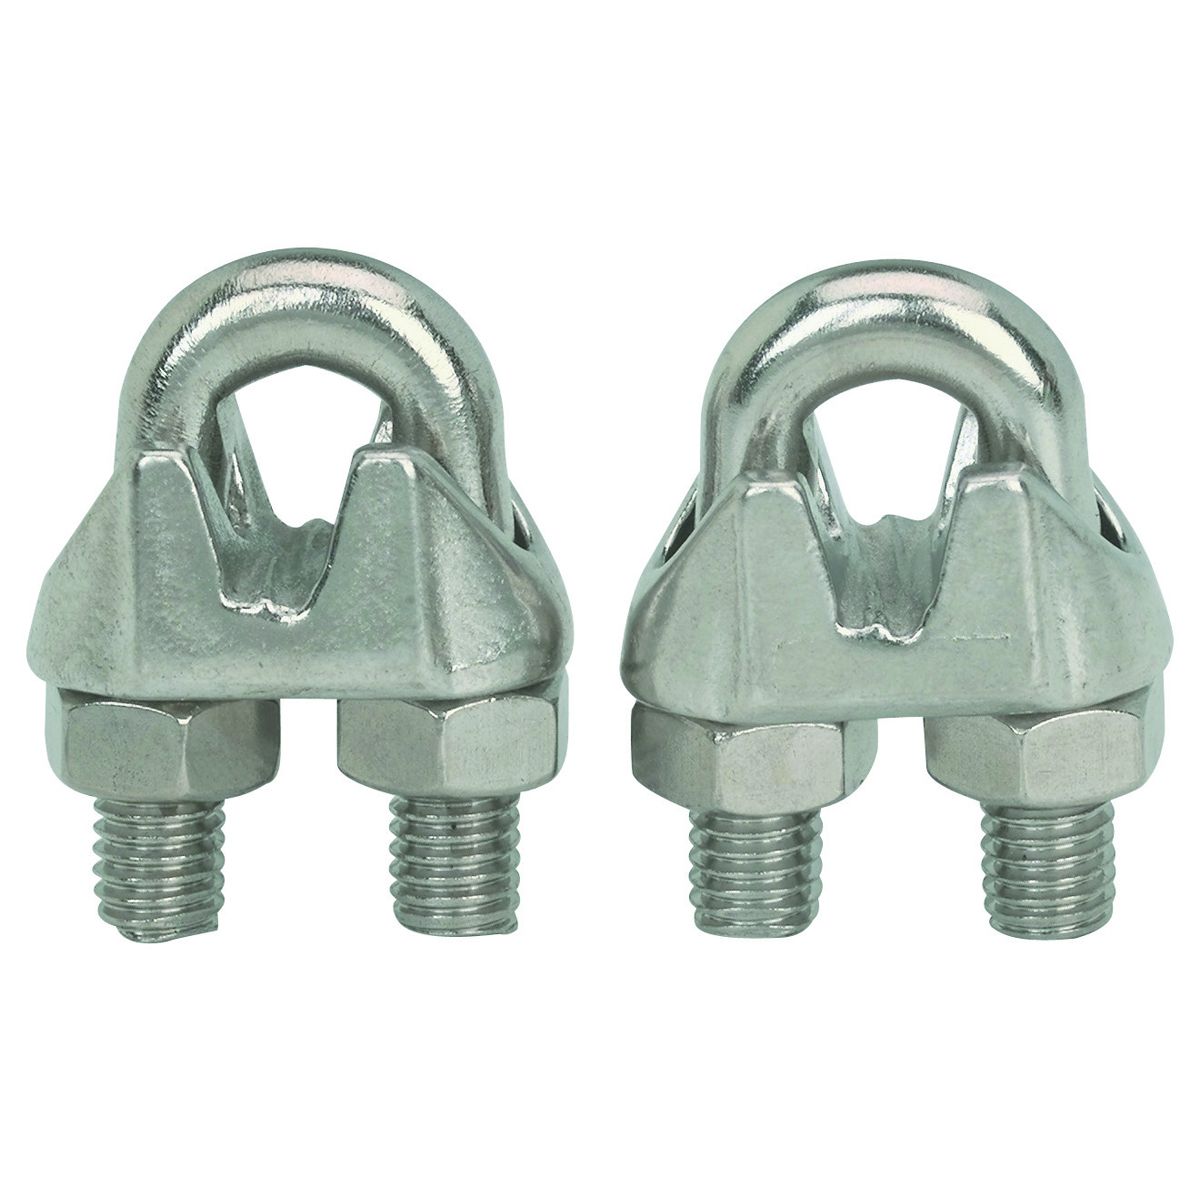 HAUL-MASTER 2 Piece 1/4" Wire Rope Clips